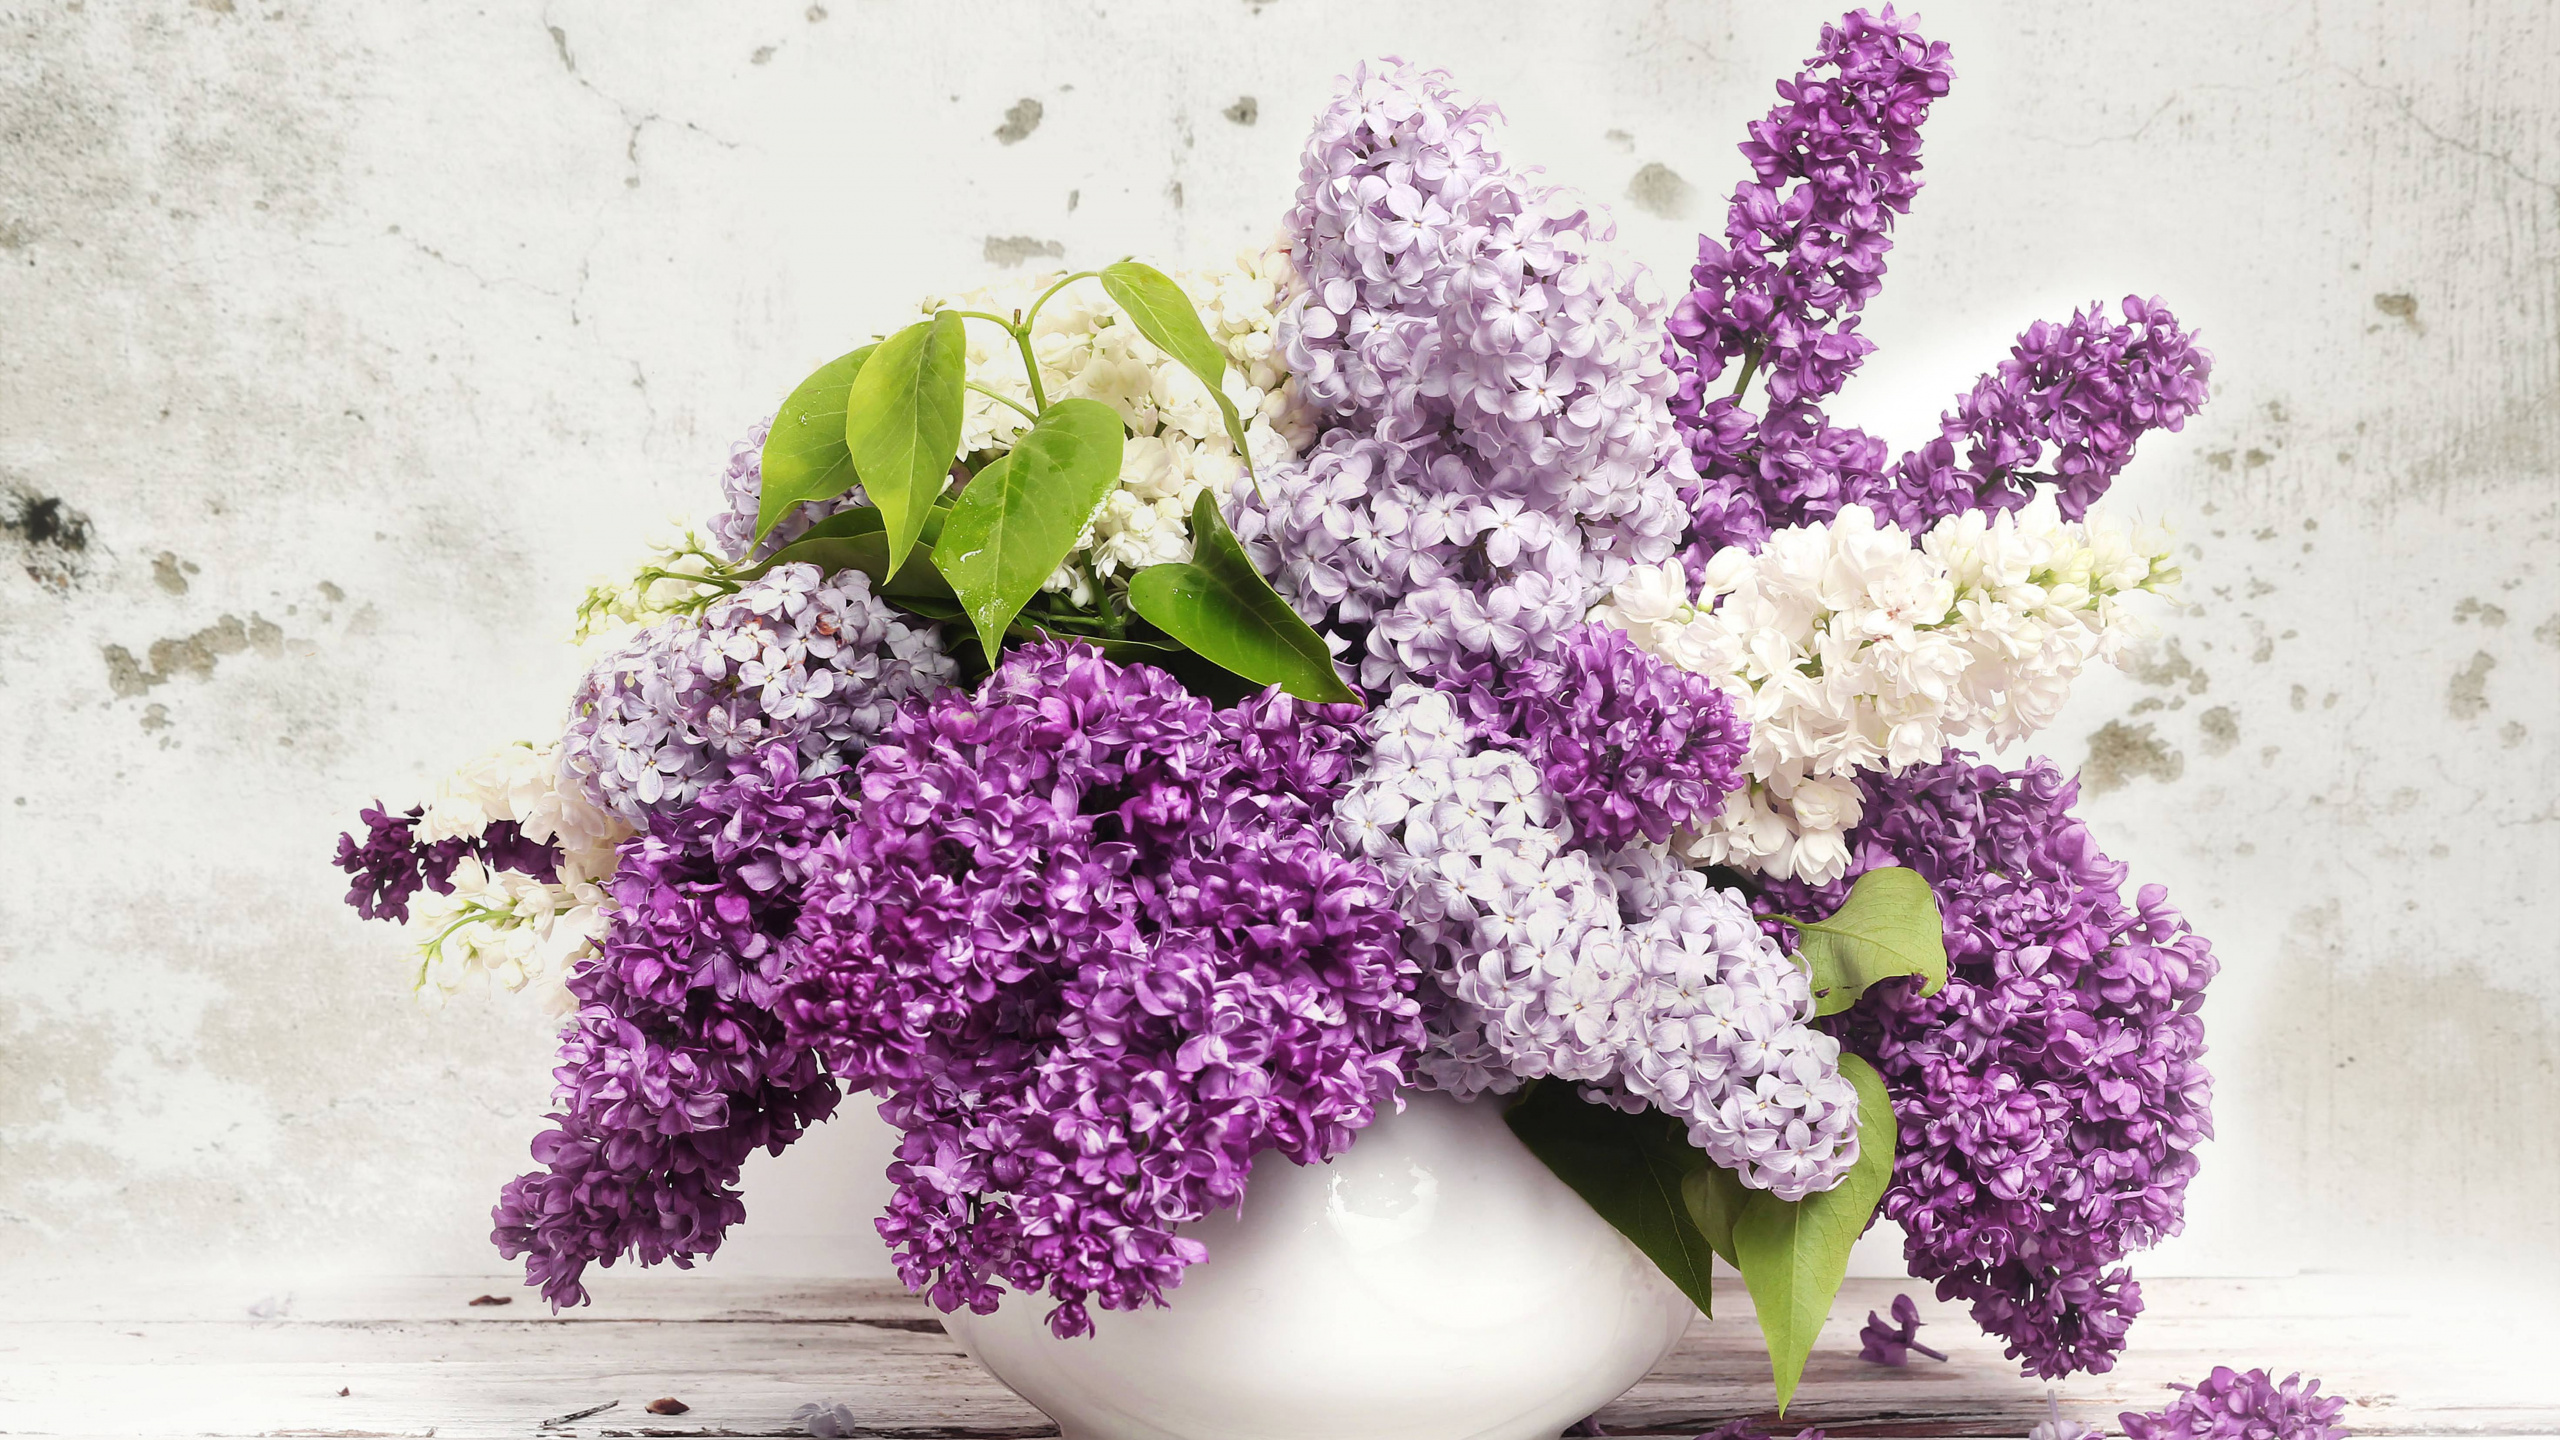 Purple and White Flowers in White Ceramic Vase. Wallpaper in 2560x1440 Resolution